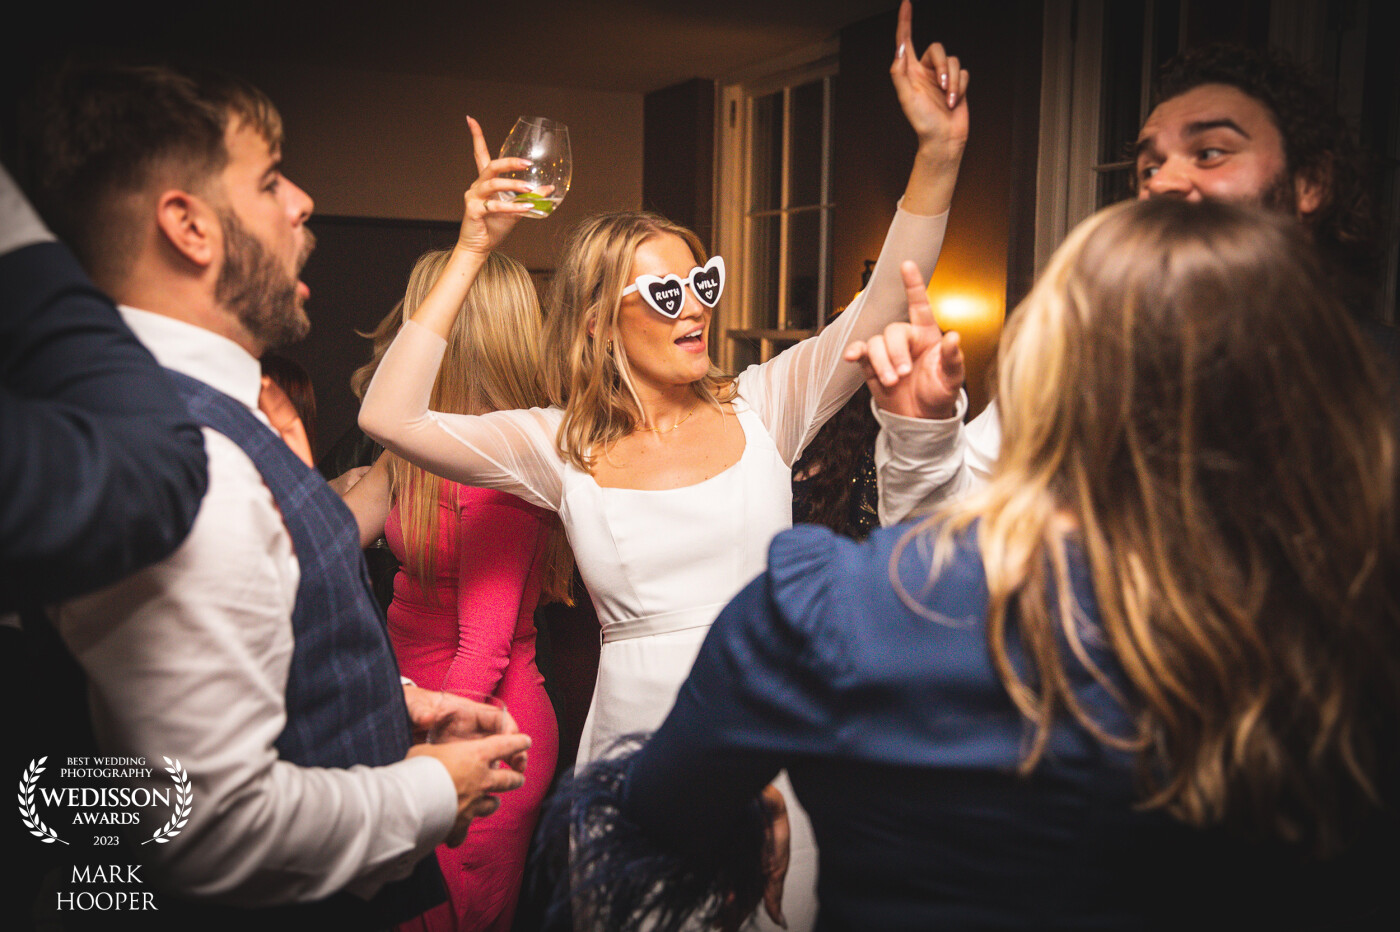 A special moment captured when the dancefloor momentarily opened up to reveal the bride dancing in some personalised sunglasses!